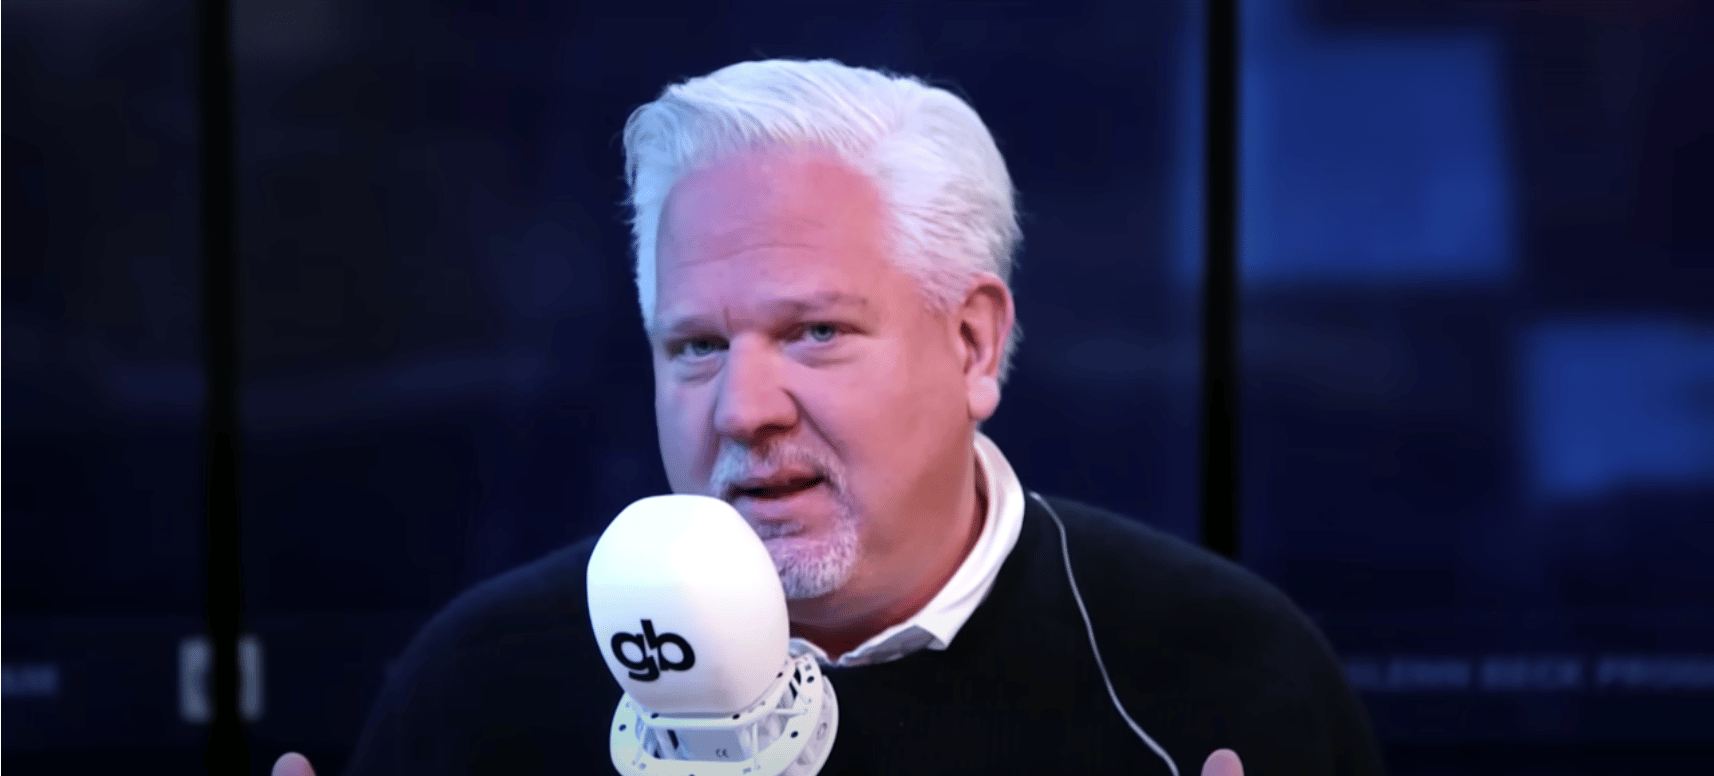 (WATCH) Glenn Beck Shares Terrifying Dream On-Air about Moloch and Baal: ‘You Have to Start Reading the News with Spiritual Eyes!’